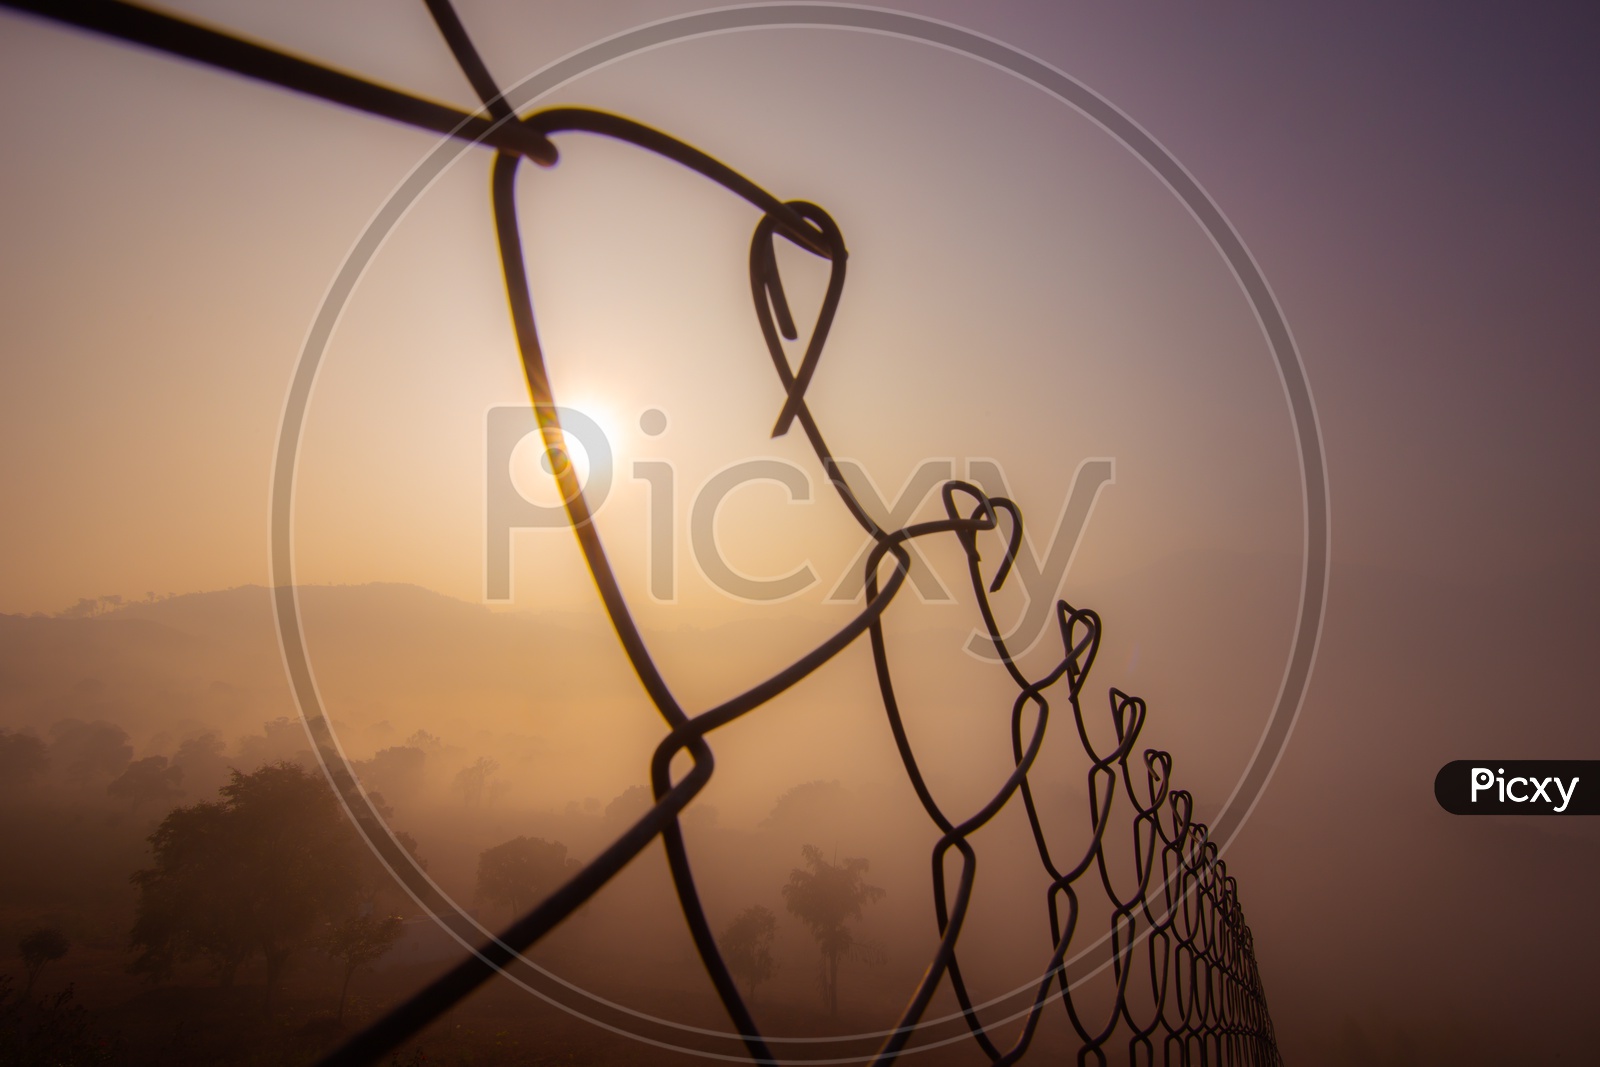 Silhouette Of Fence  Over Sunset Sky